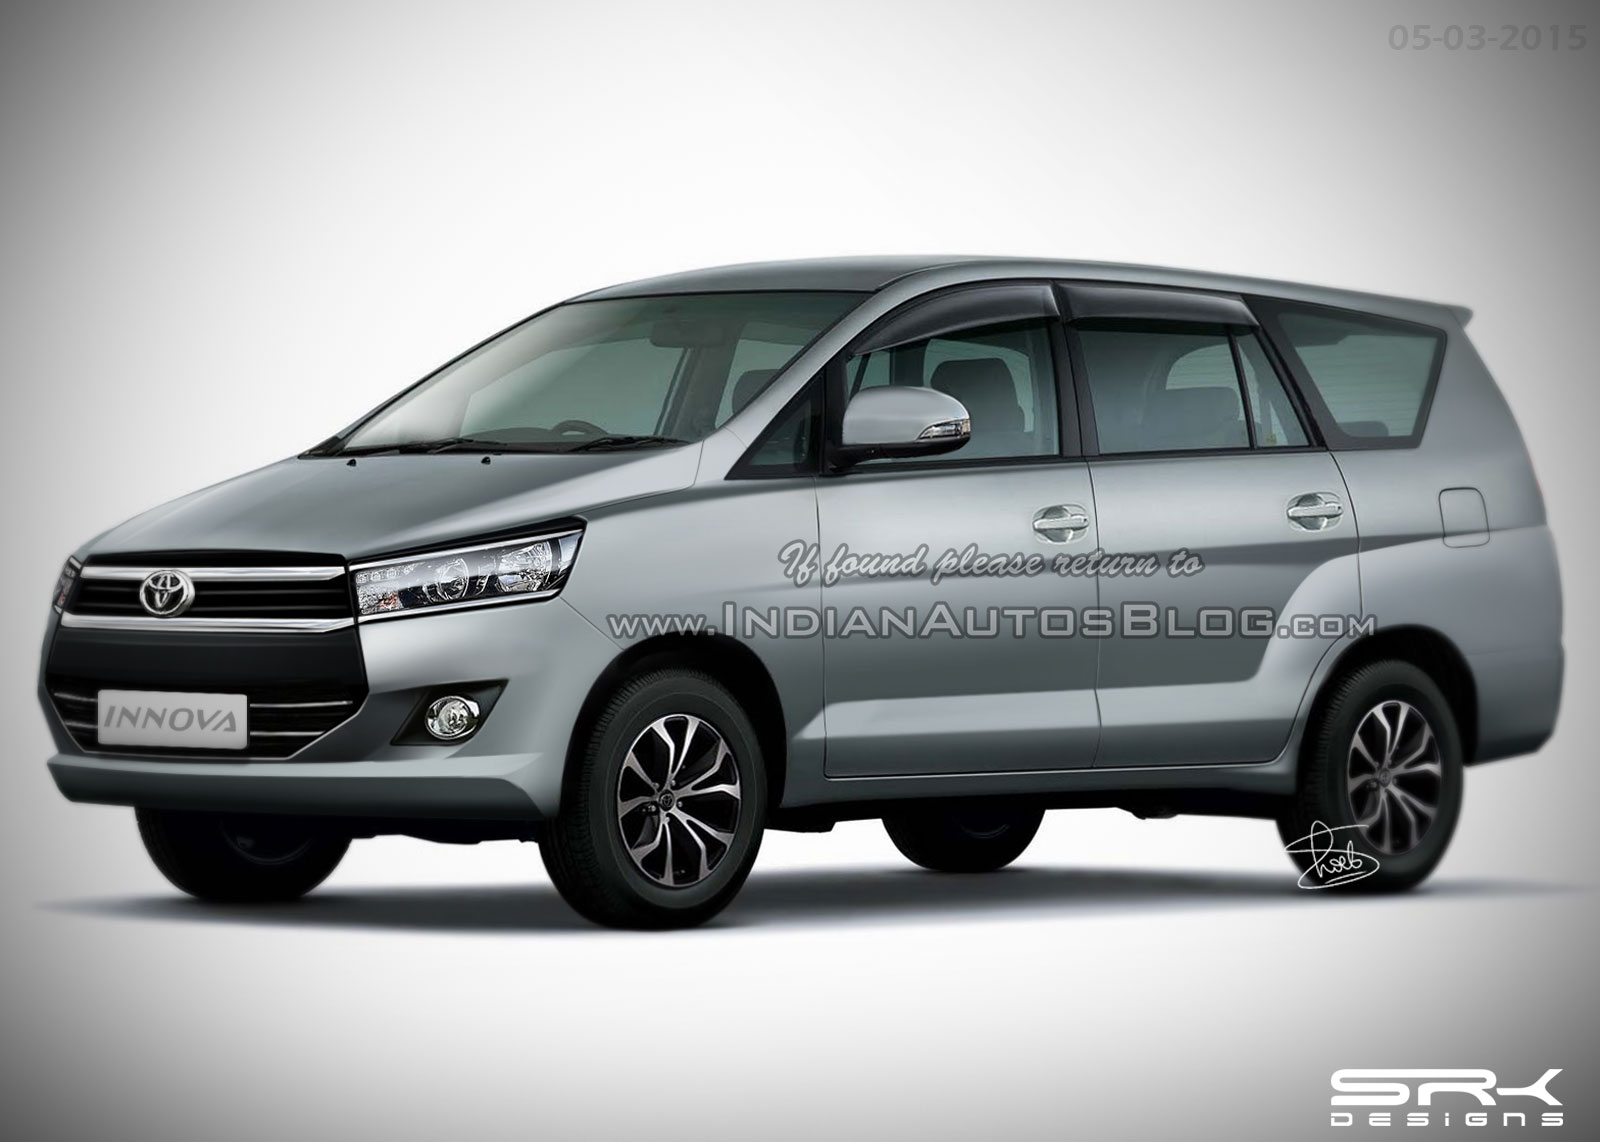 2016 Toyota Innova To Have A Price Hike Of Inr 1 1 5 Lakhs